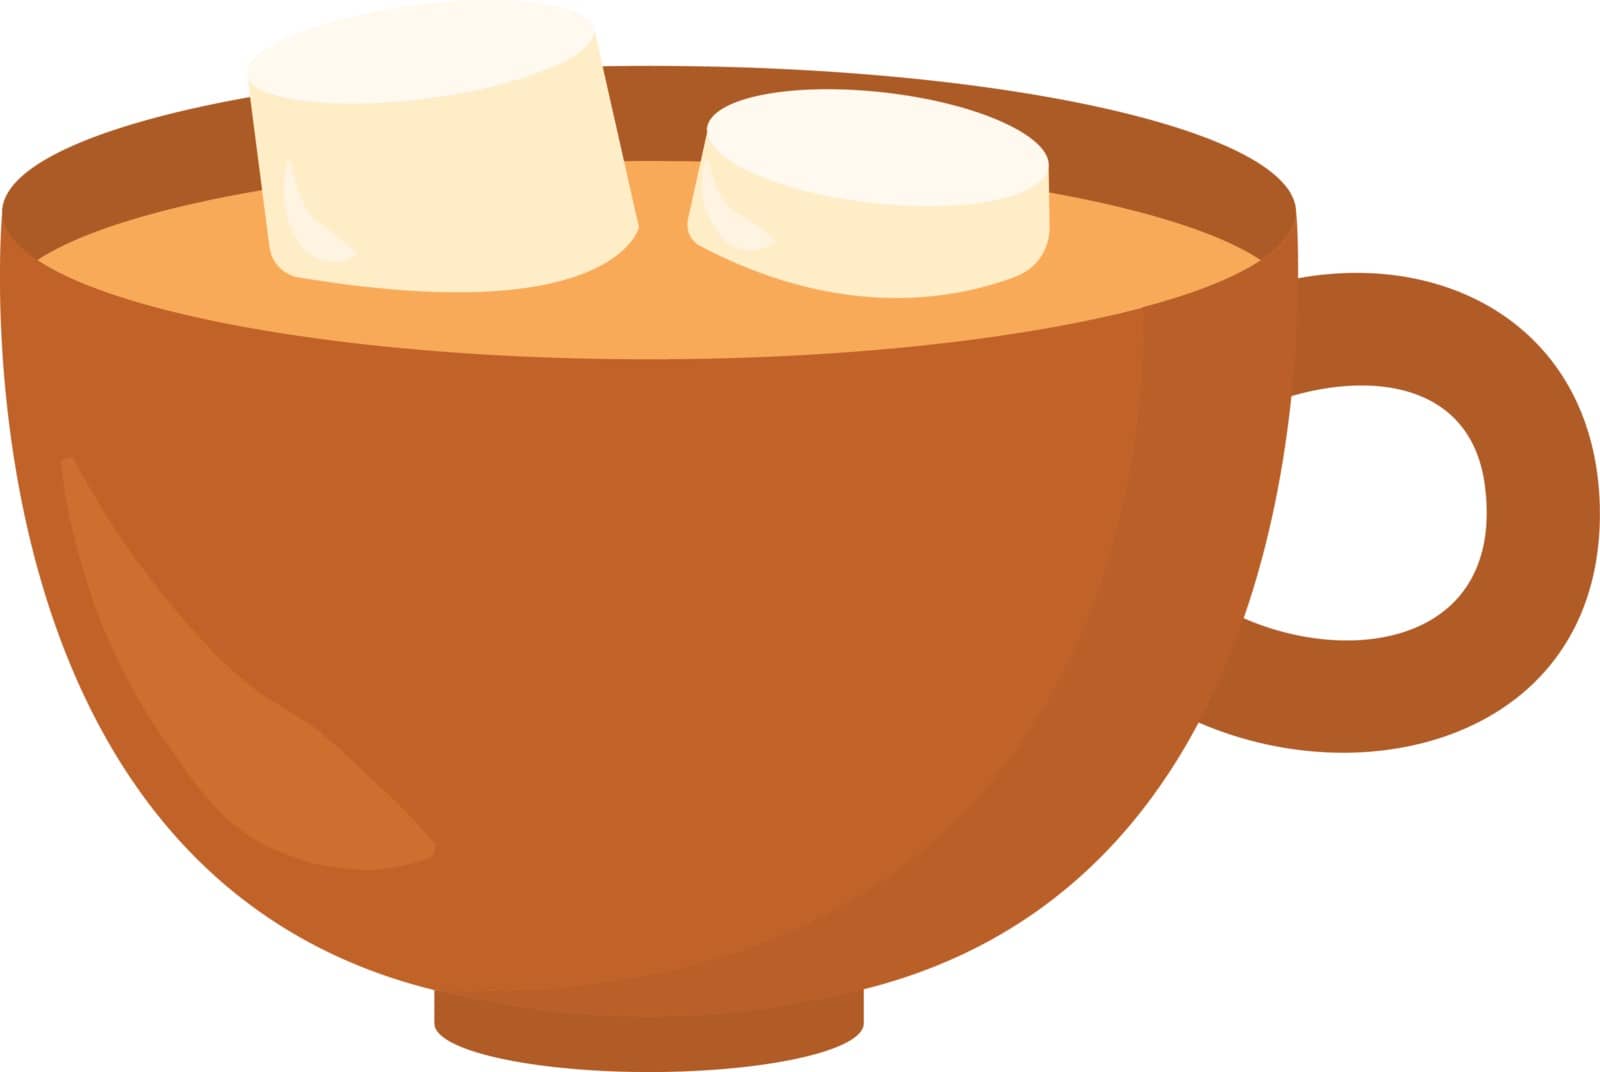 Cappuccino in pot, illustration, vector on white background.